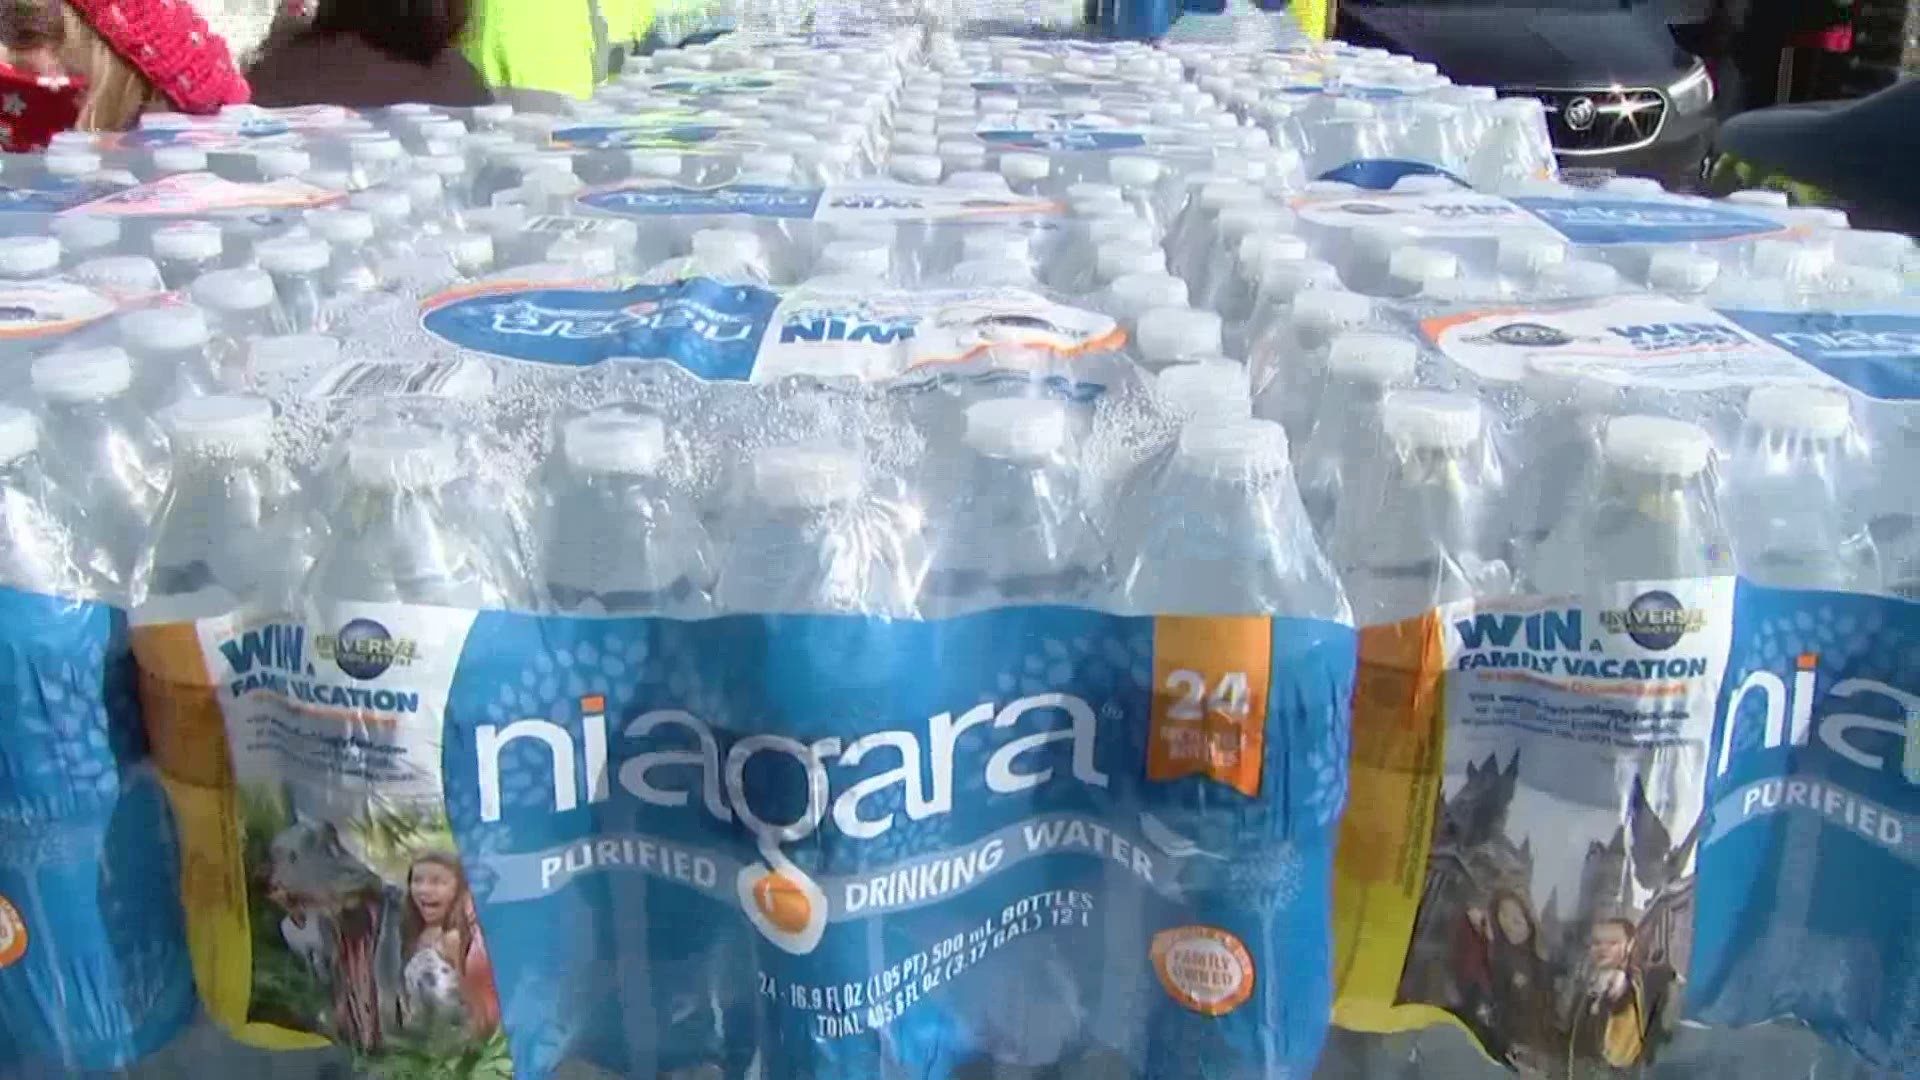 Officials say they handed out more than one million units of water Friday, and hundreds lined up for more on Saturday.